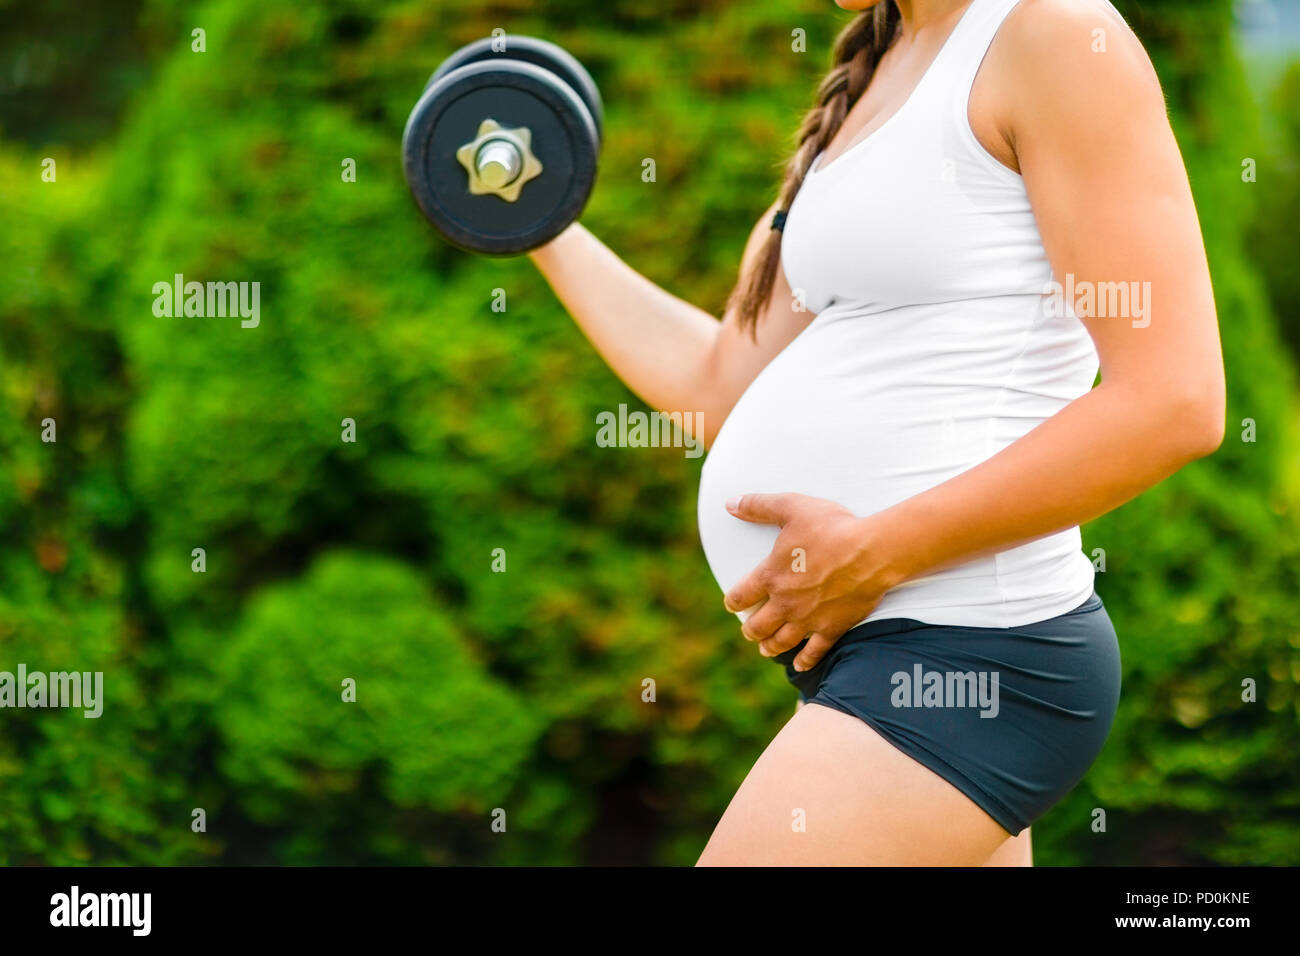 Pregnant Woman Touching Stomach While Exercising With Dumbbell Stock Photo